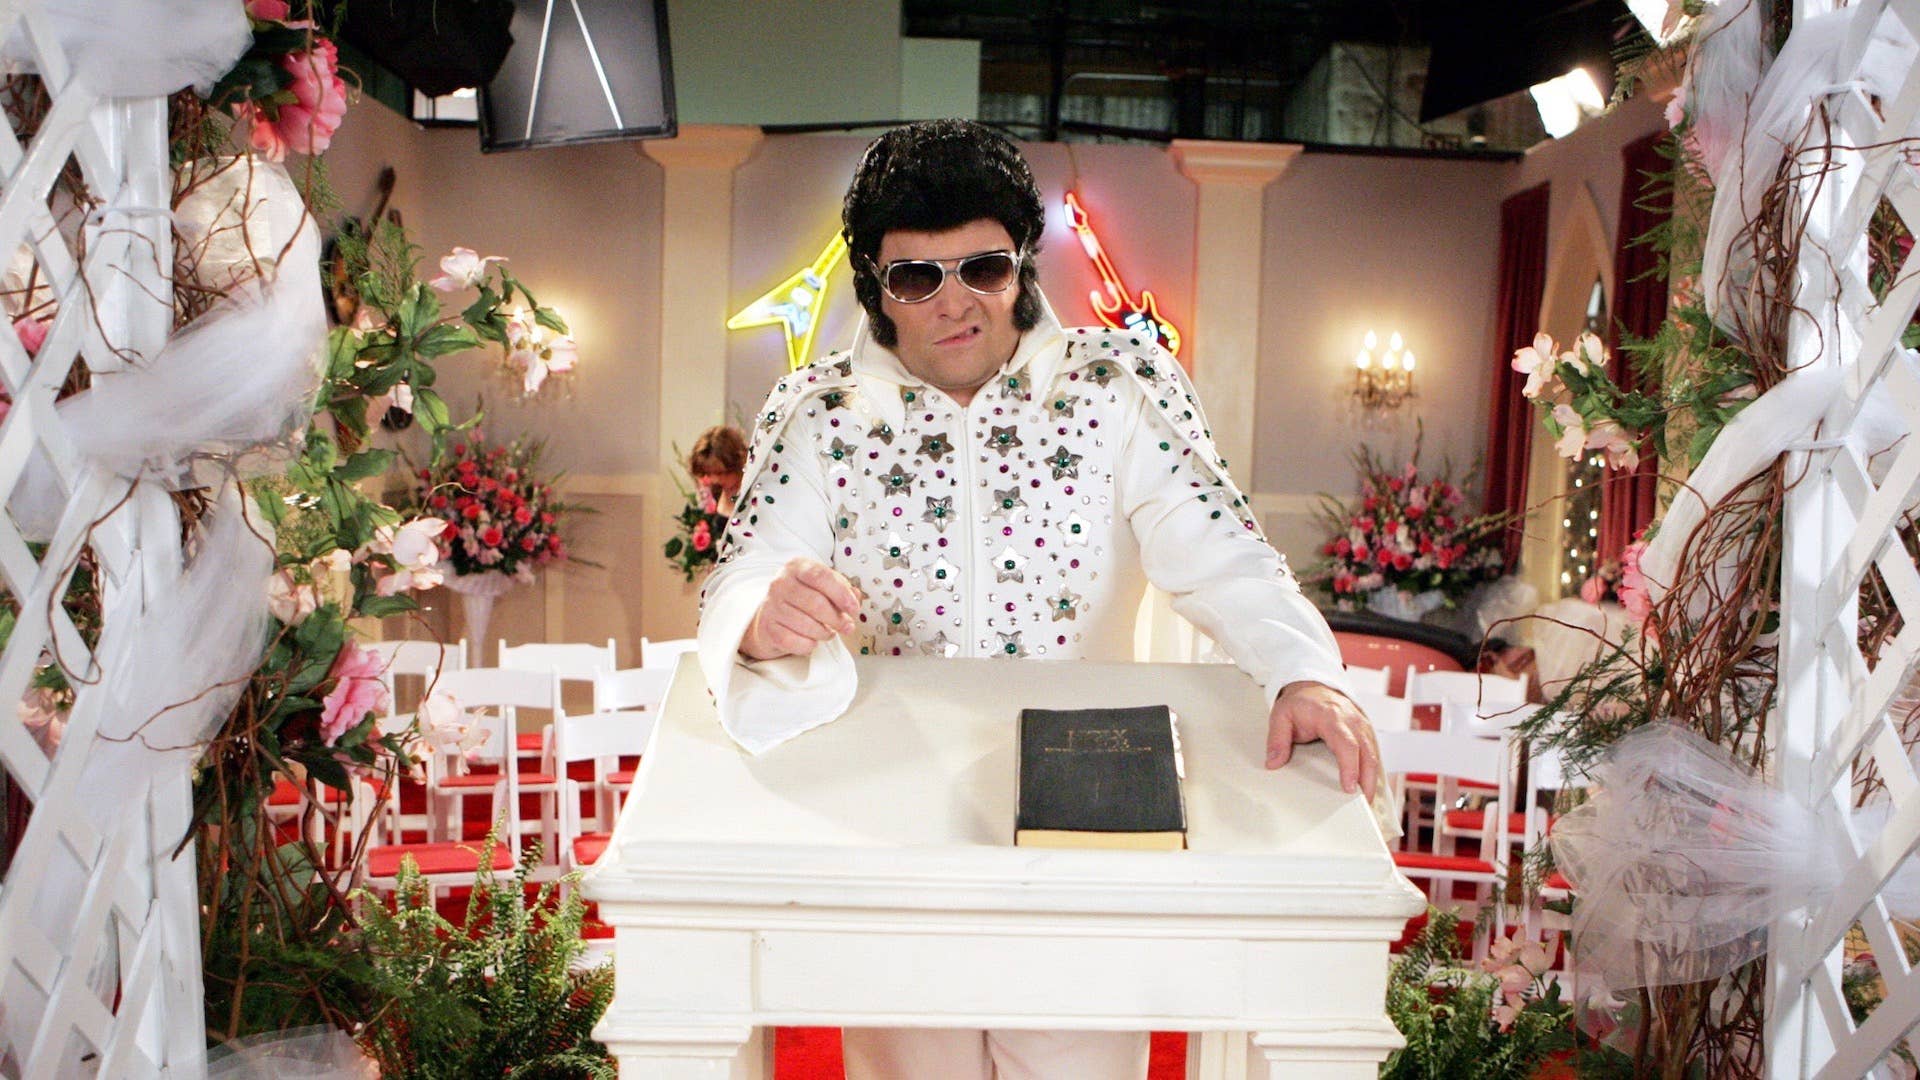 Tony (Jason Alexander) dresses up as Elvis and goes to a wedding chapel